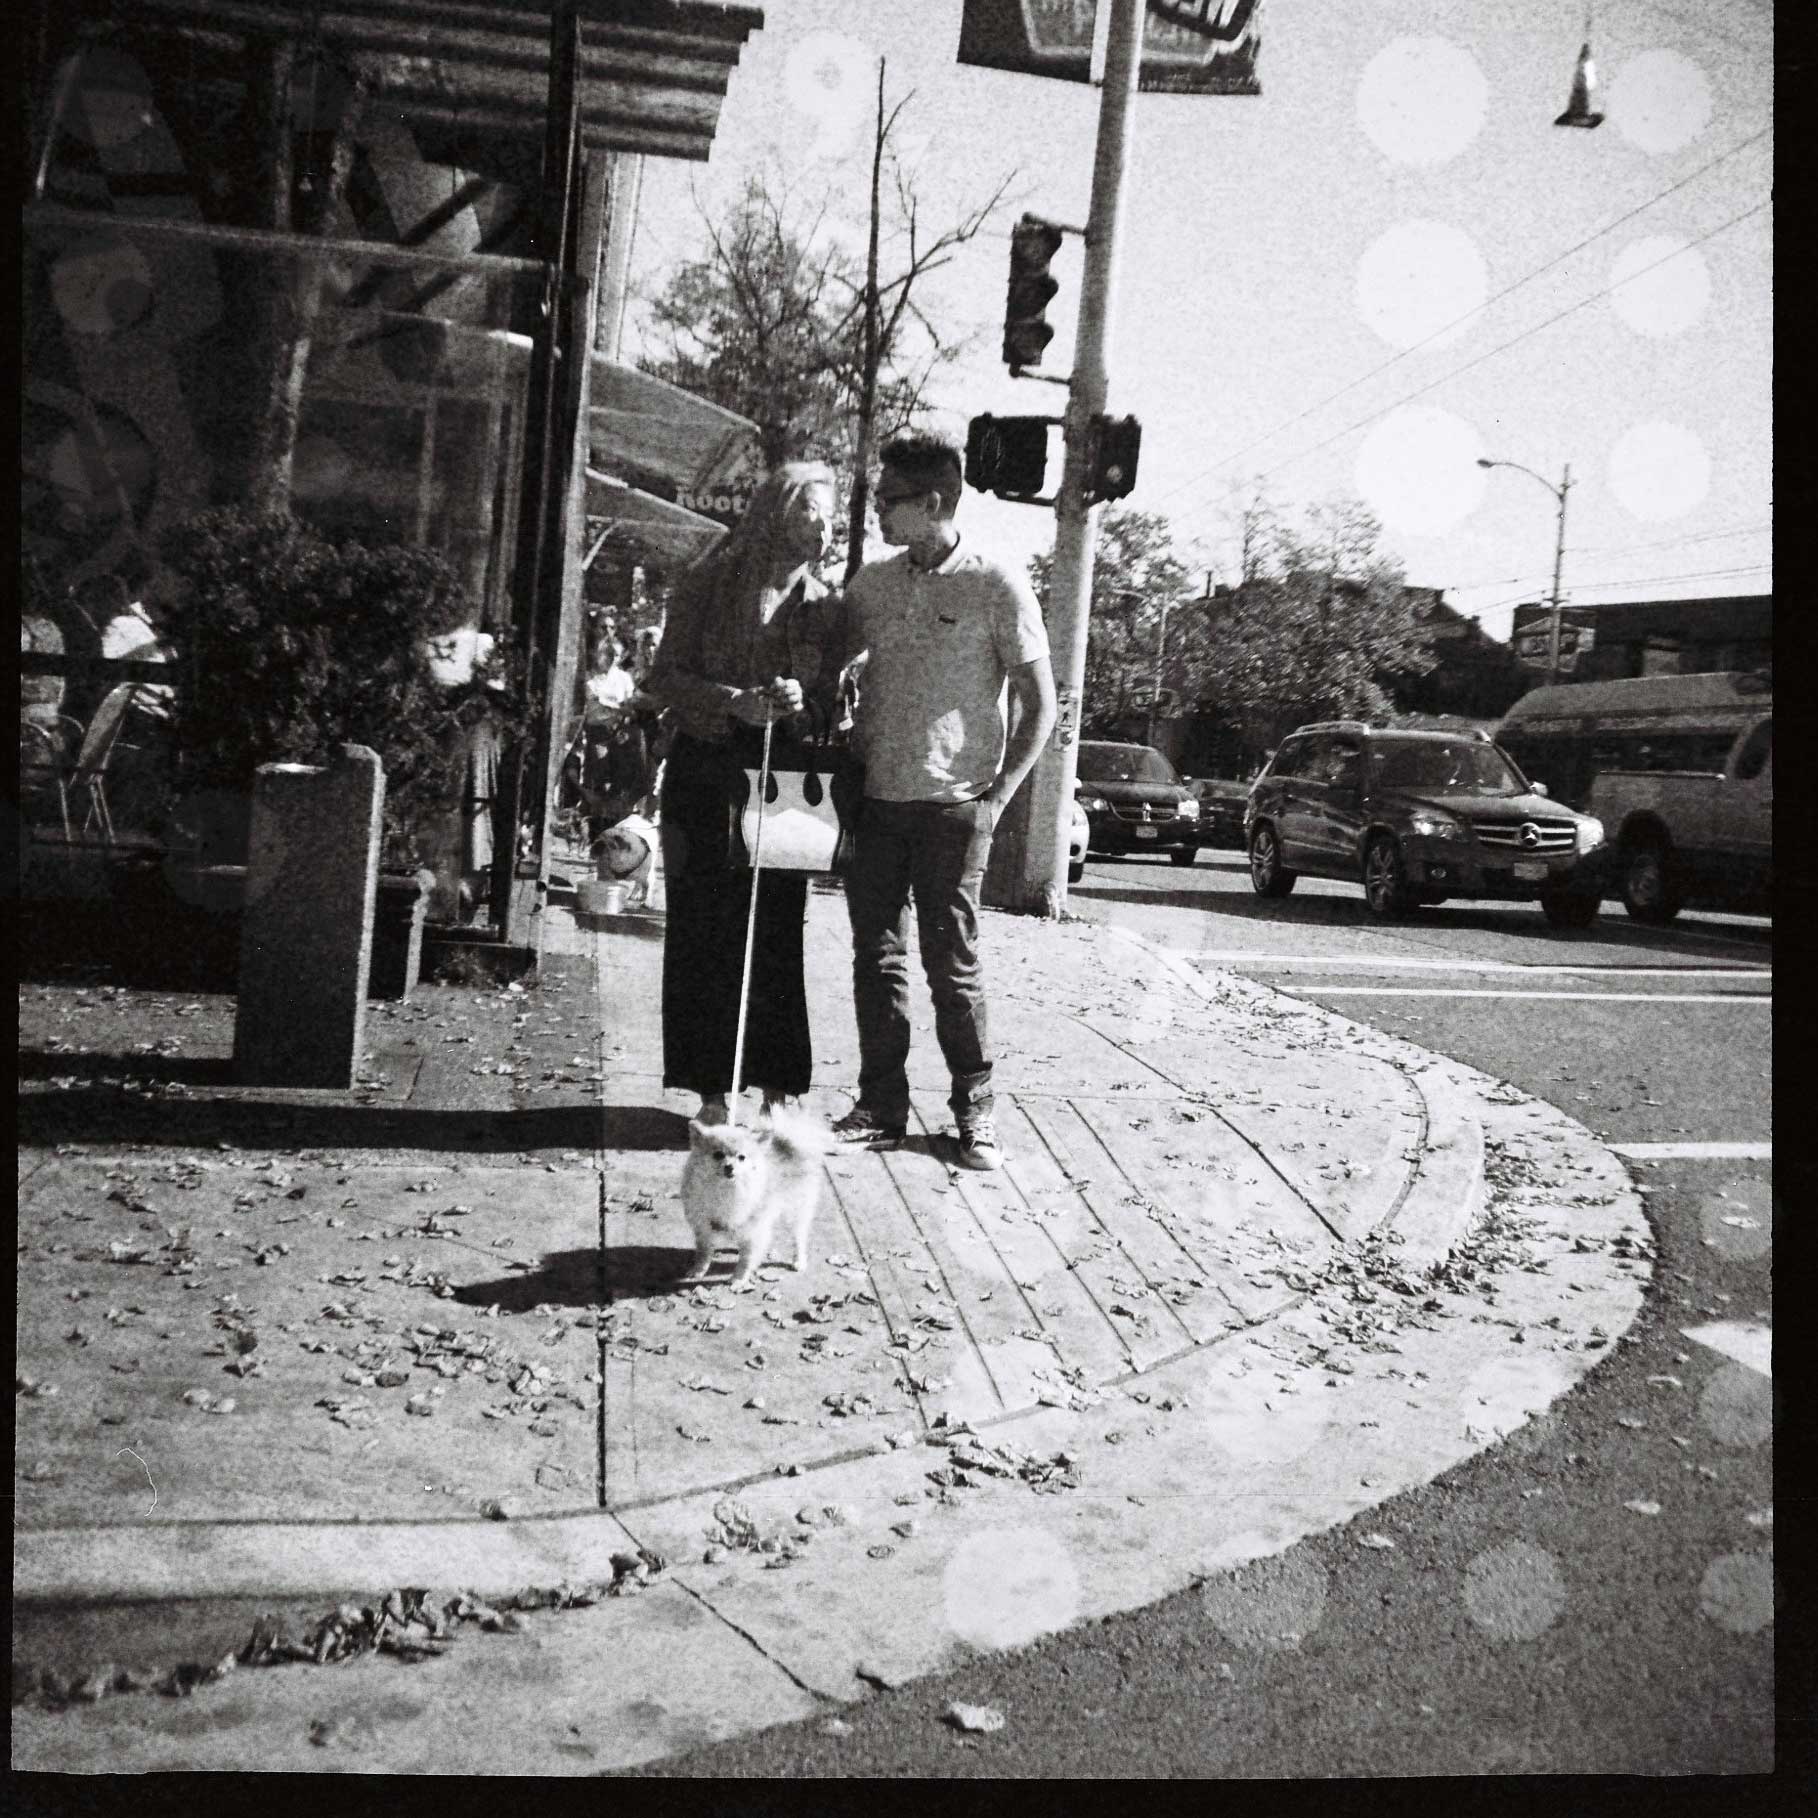  Kits couple with dog West 4th Ave., Vancouver Diana F, 120 lomo film 3.15 